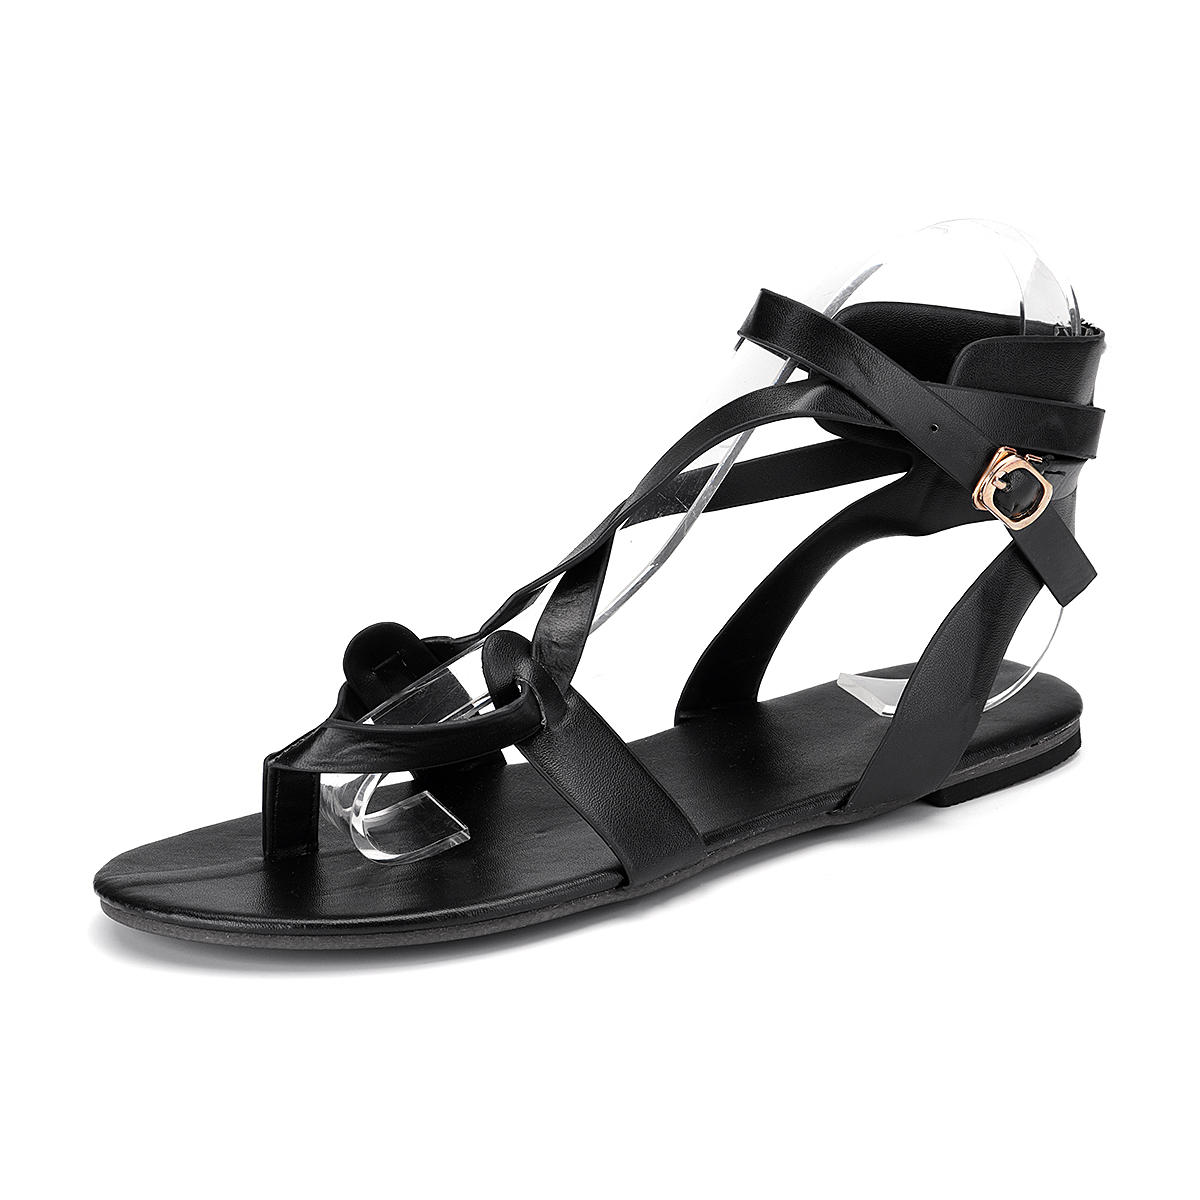 53% OFF on Large Size Roman Ankle Cross Strap Casual Clip Toe Sandals